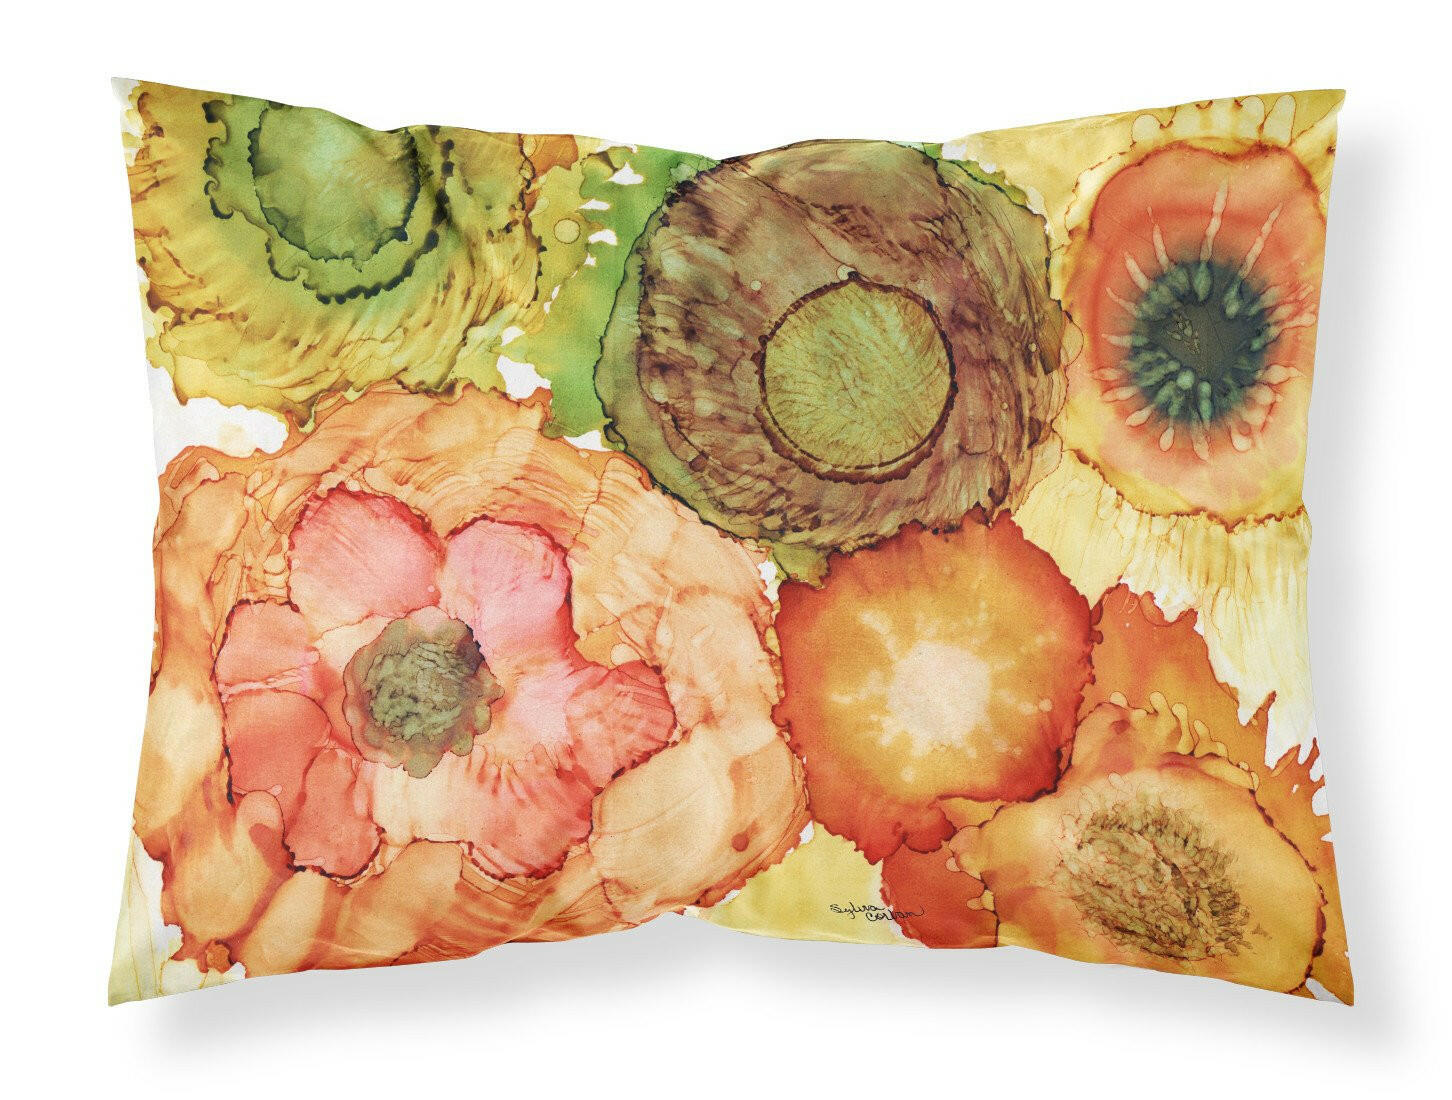 Abstract Flowers Blossoms Fabric Standard Pillowcase 8970PILLOWCASE by Caroline's Treasures